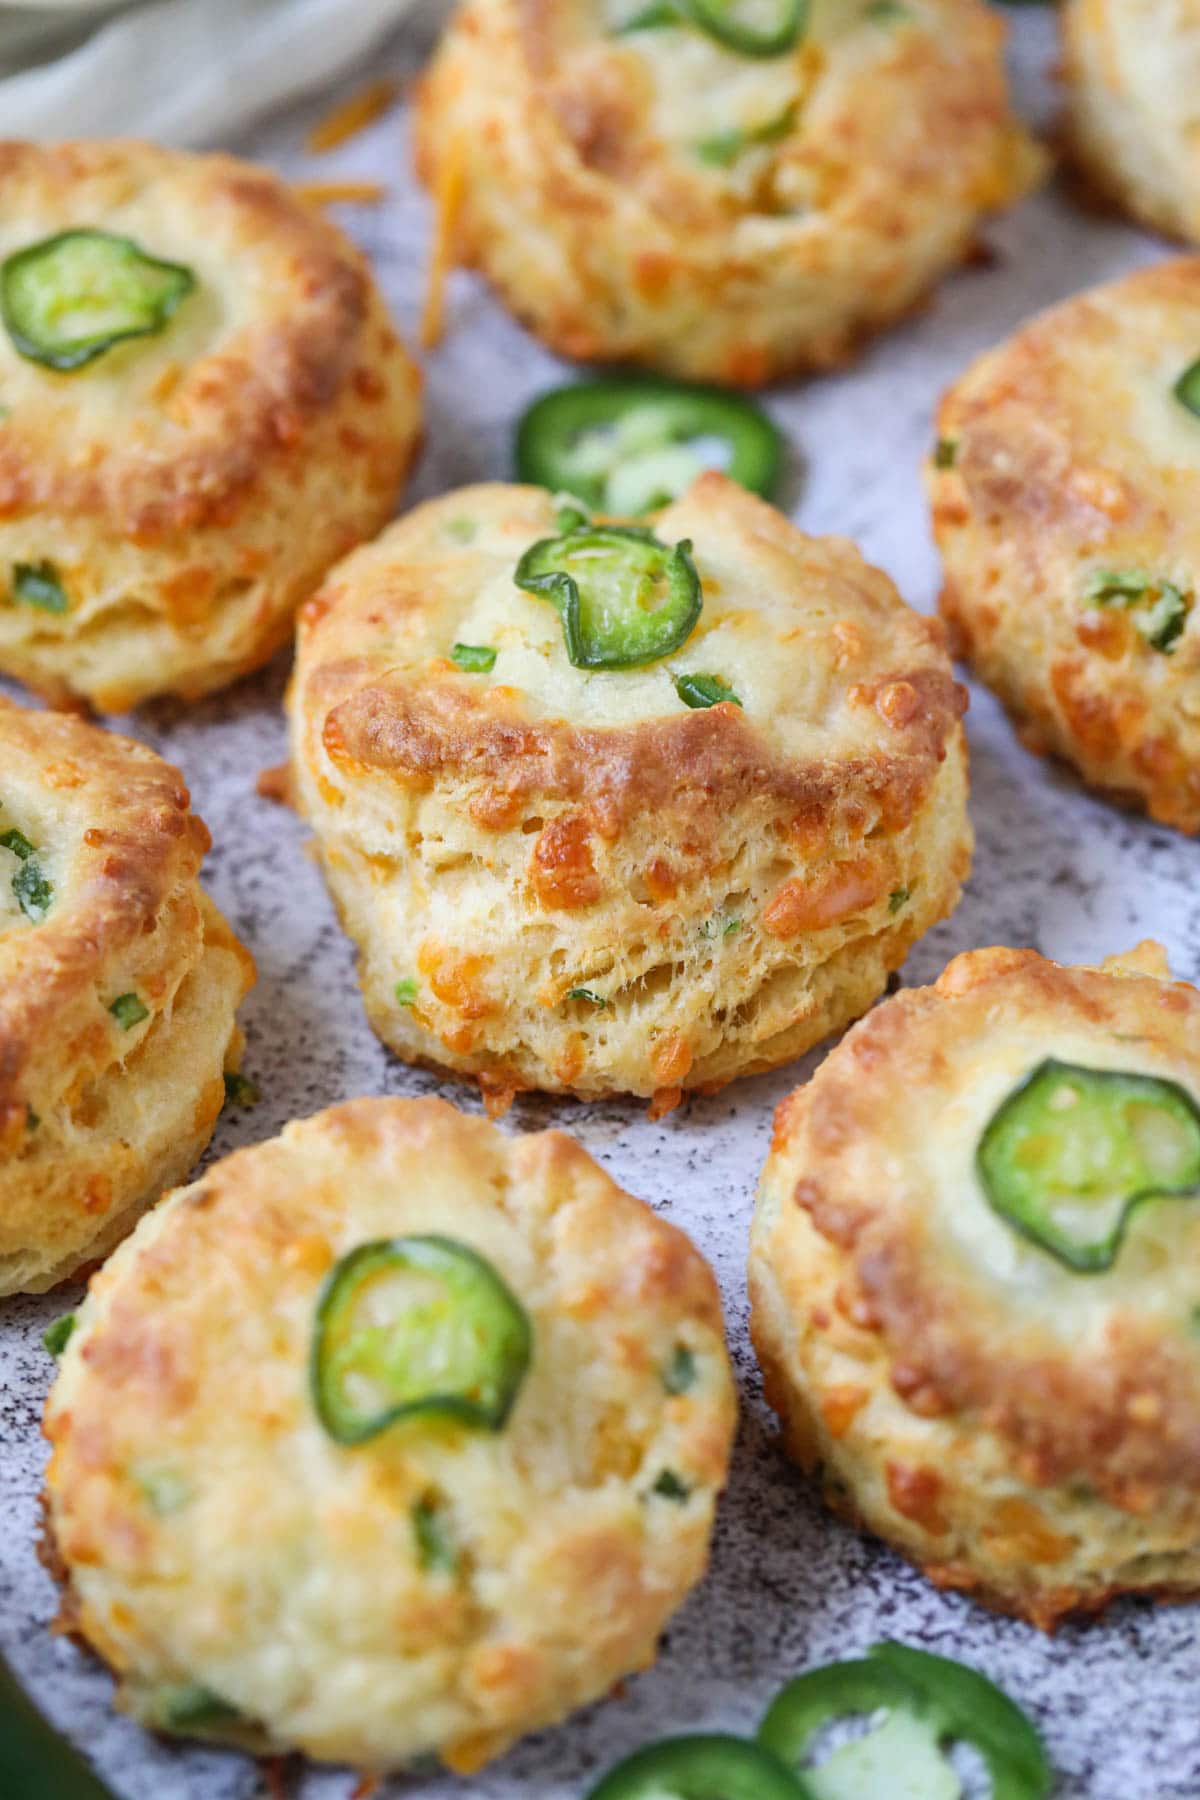 Cheddar jalapeño biscuits spread out on a white surface with a plate of cheddar cheese in the top left corner.